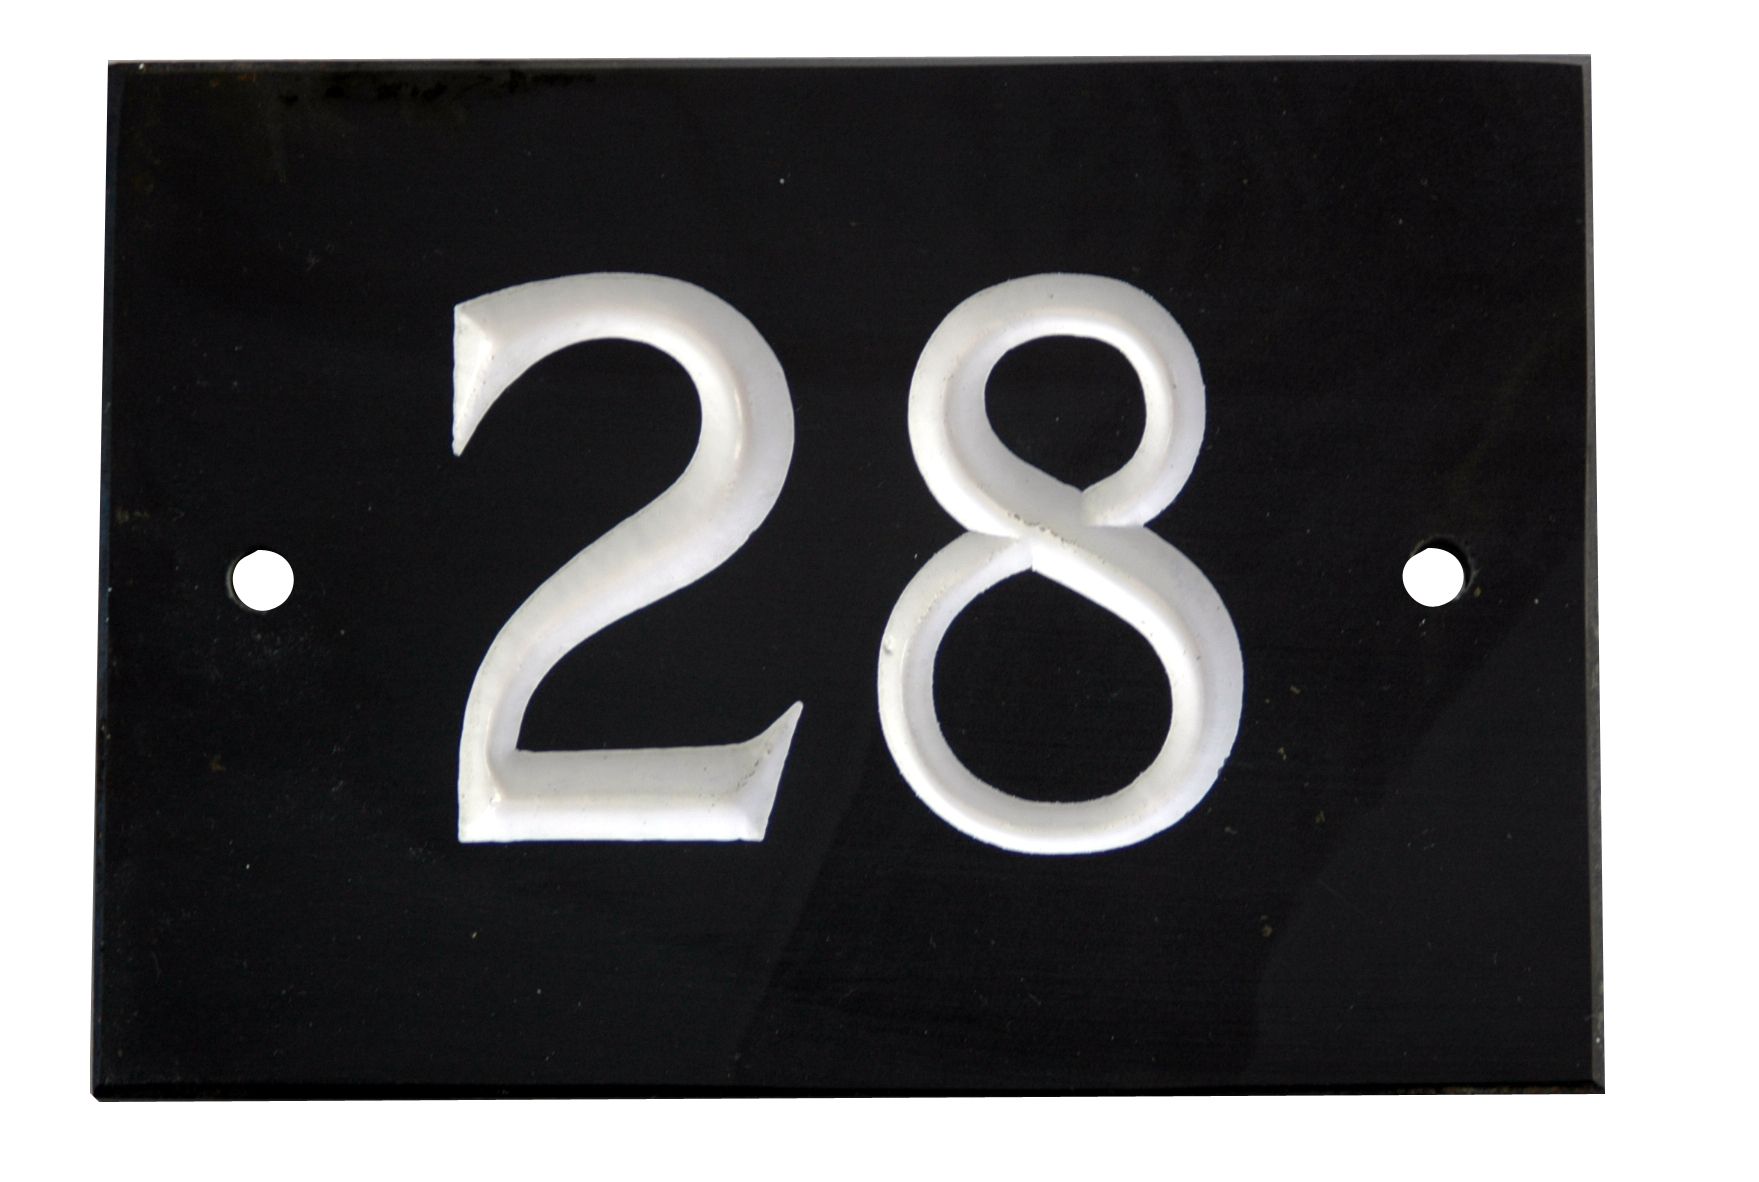 The House Nameplate Company Black & white Slate Rectangular House number 28, (H)102mm (W)140mm